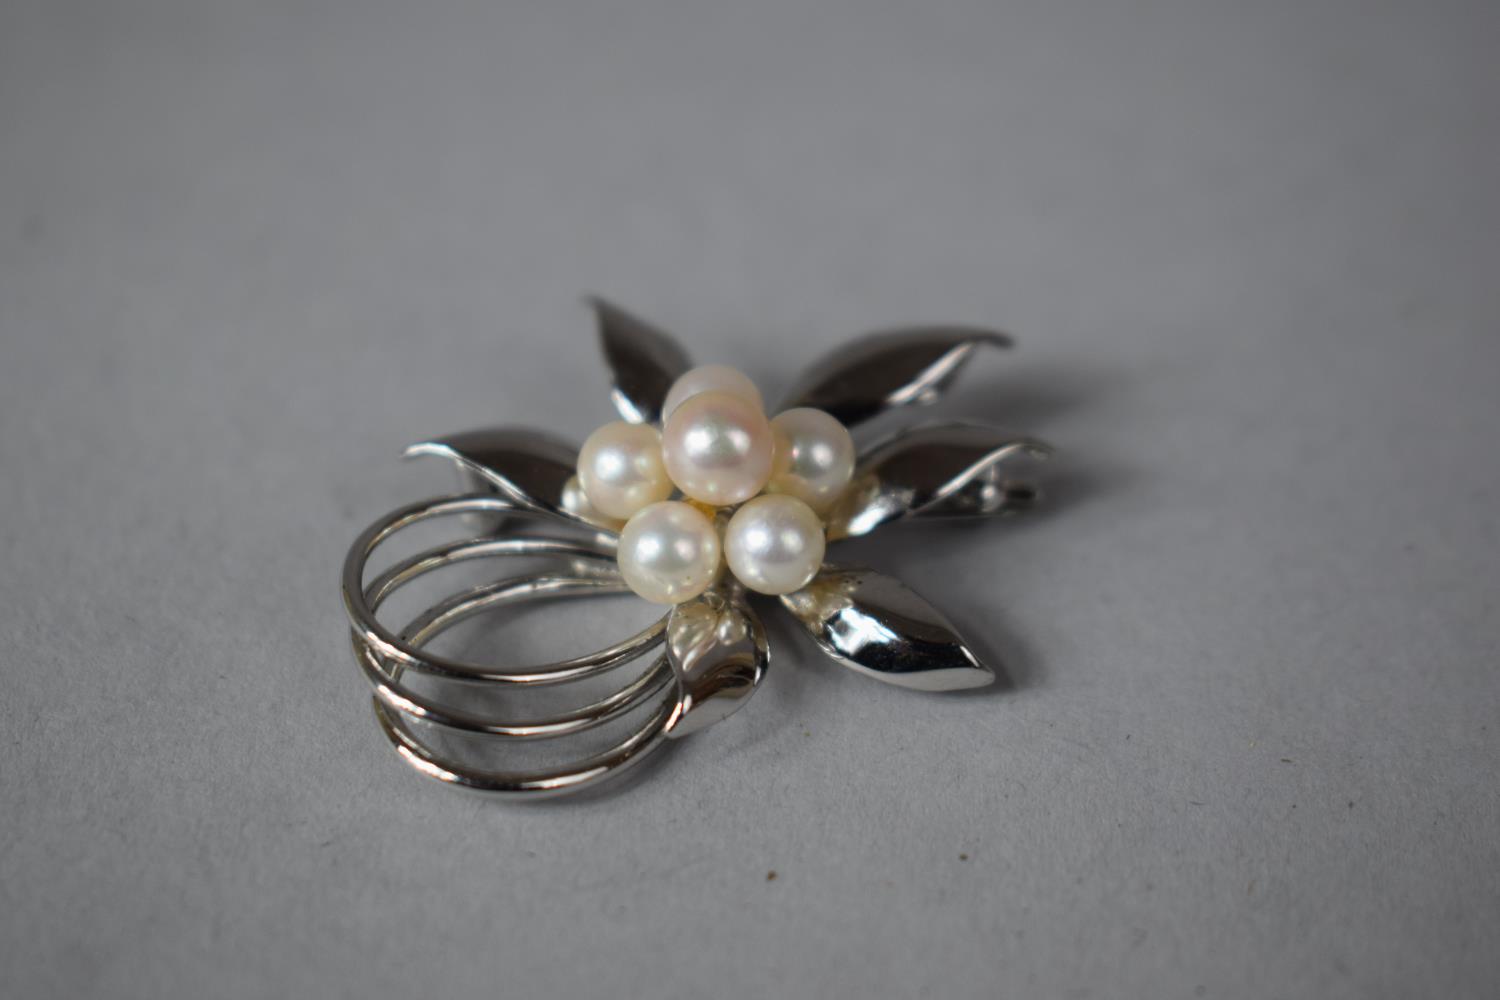 A Stylised Silver Flower Head Brooch, Stamped Silver